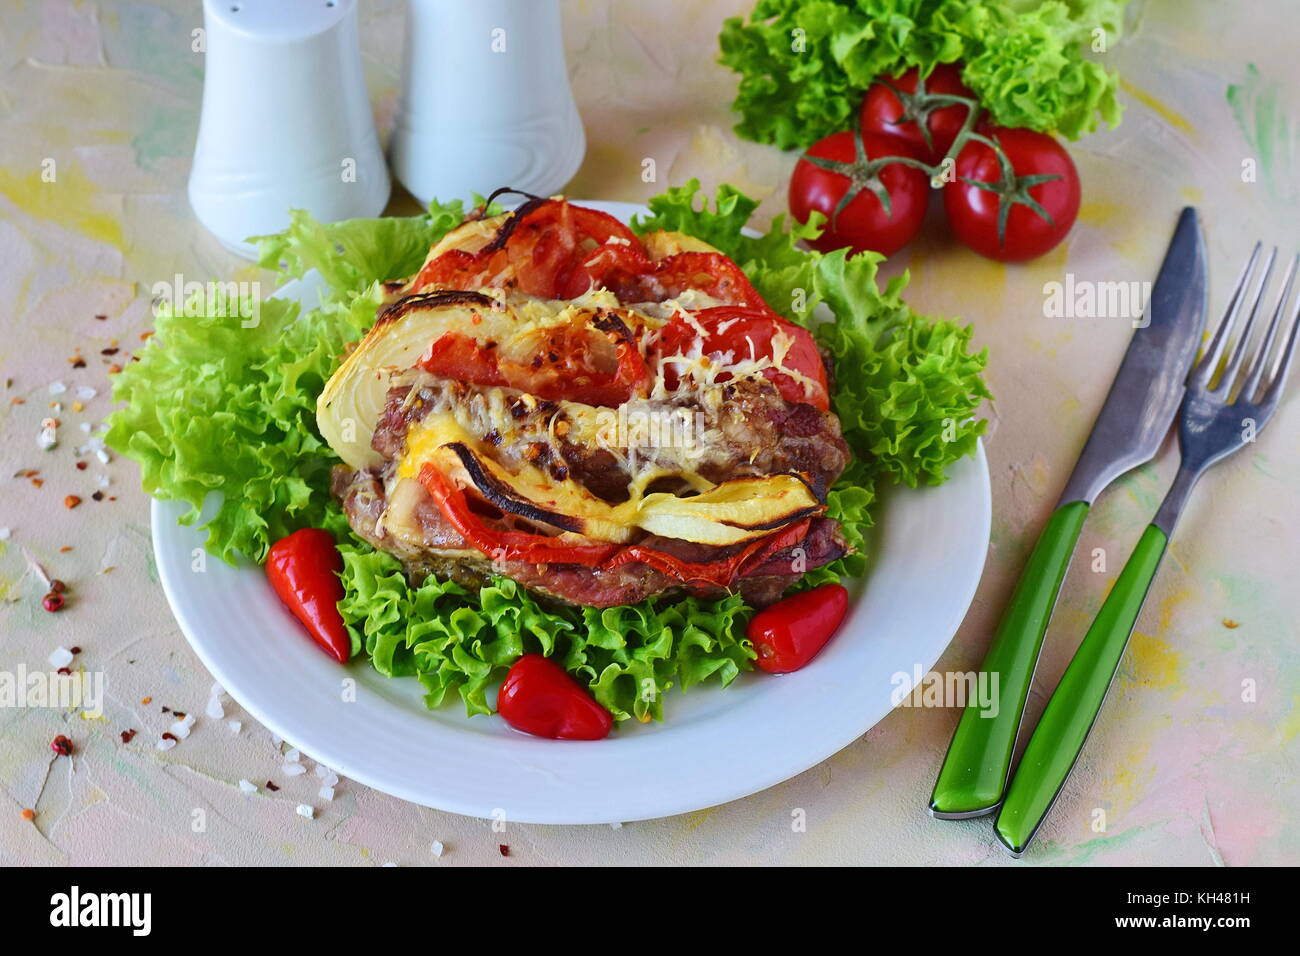 Stuffed pork roasted in oven with paprika, tomato and cheese in a white plate on abstract background Stock Photo